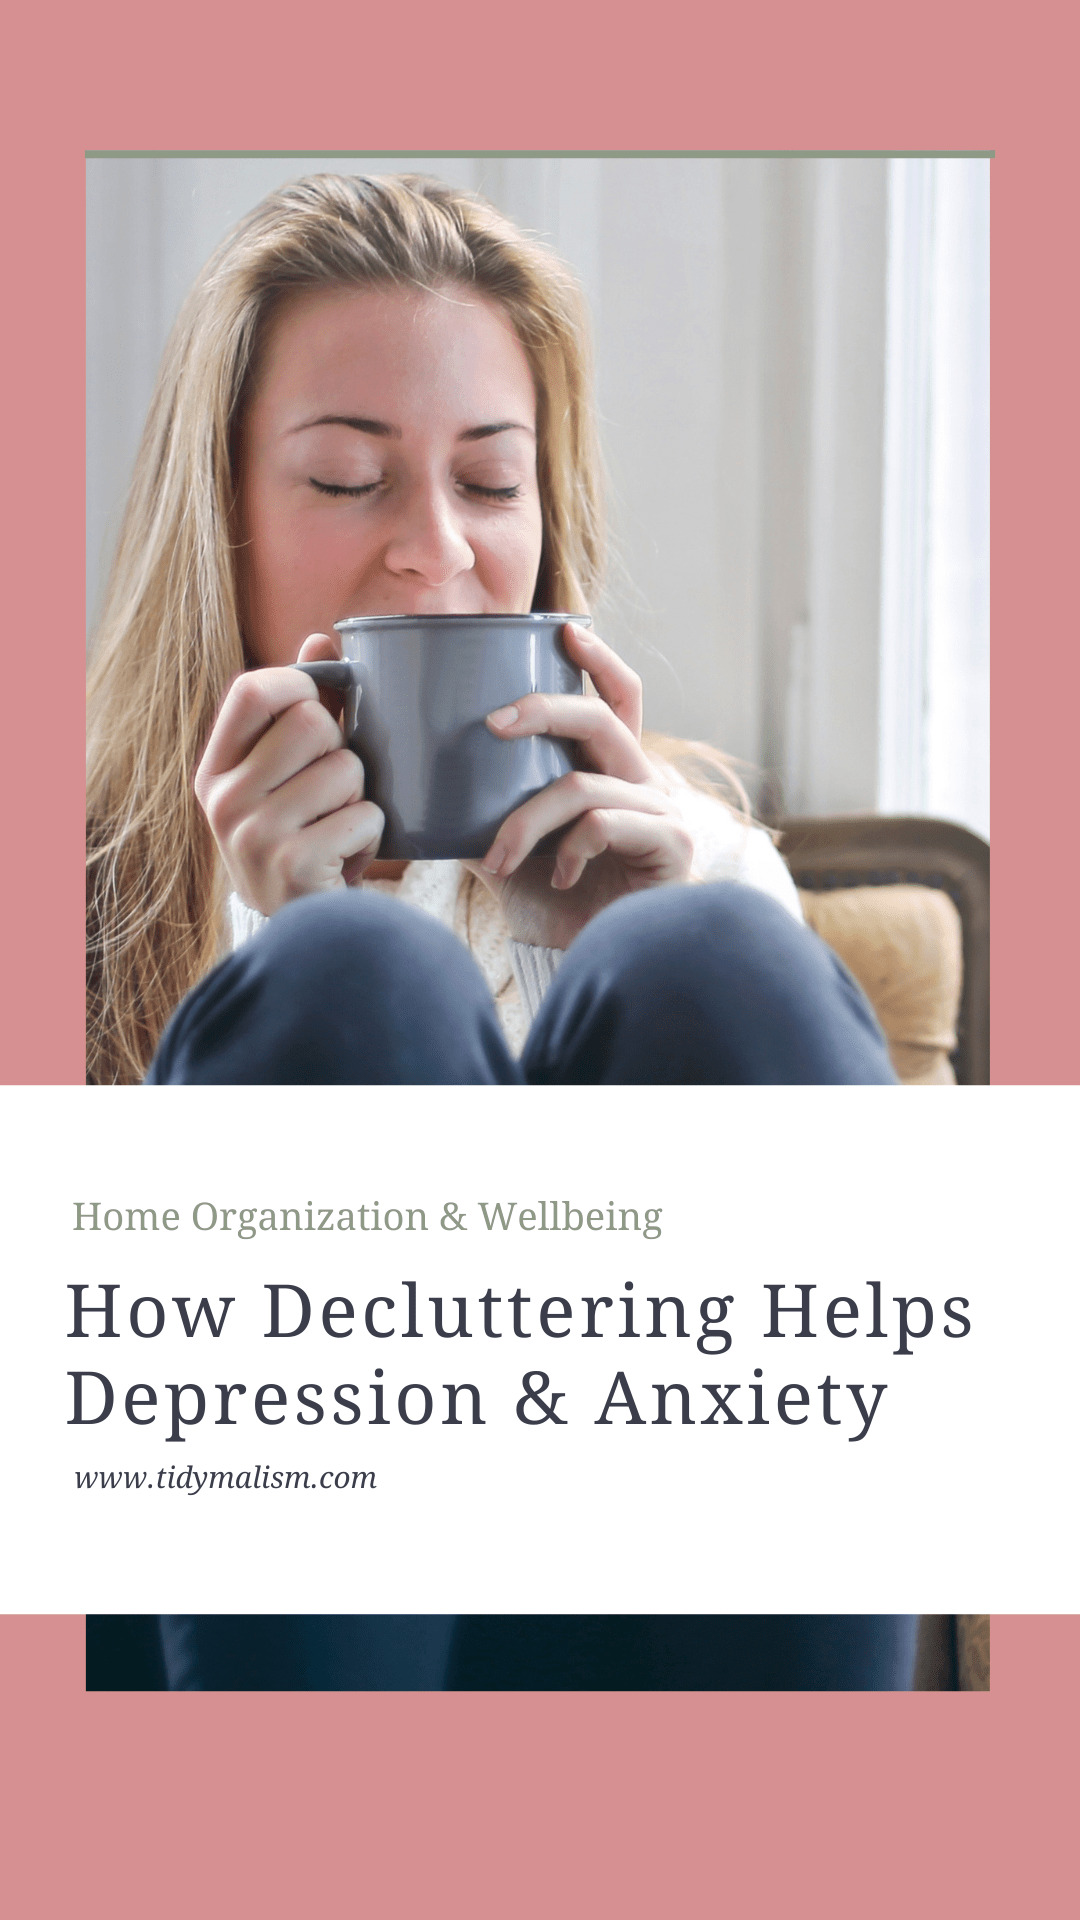 Does Decluttering Help Depression and Reduce Anxiety?